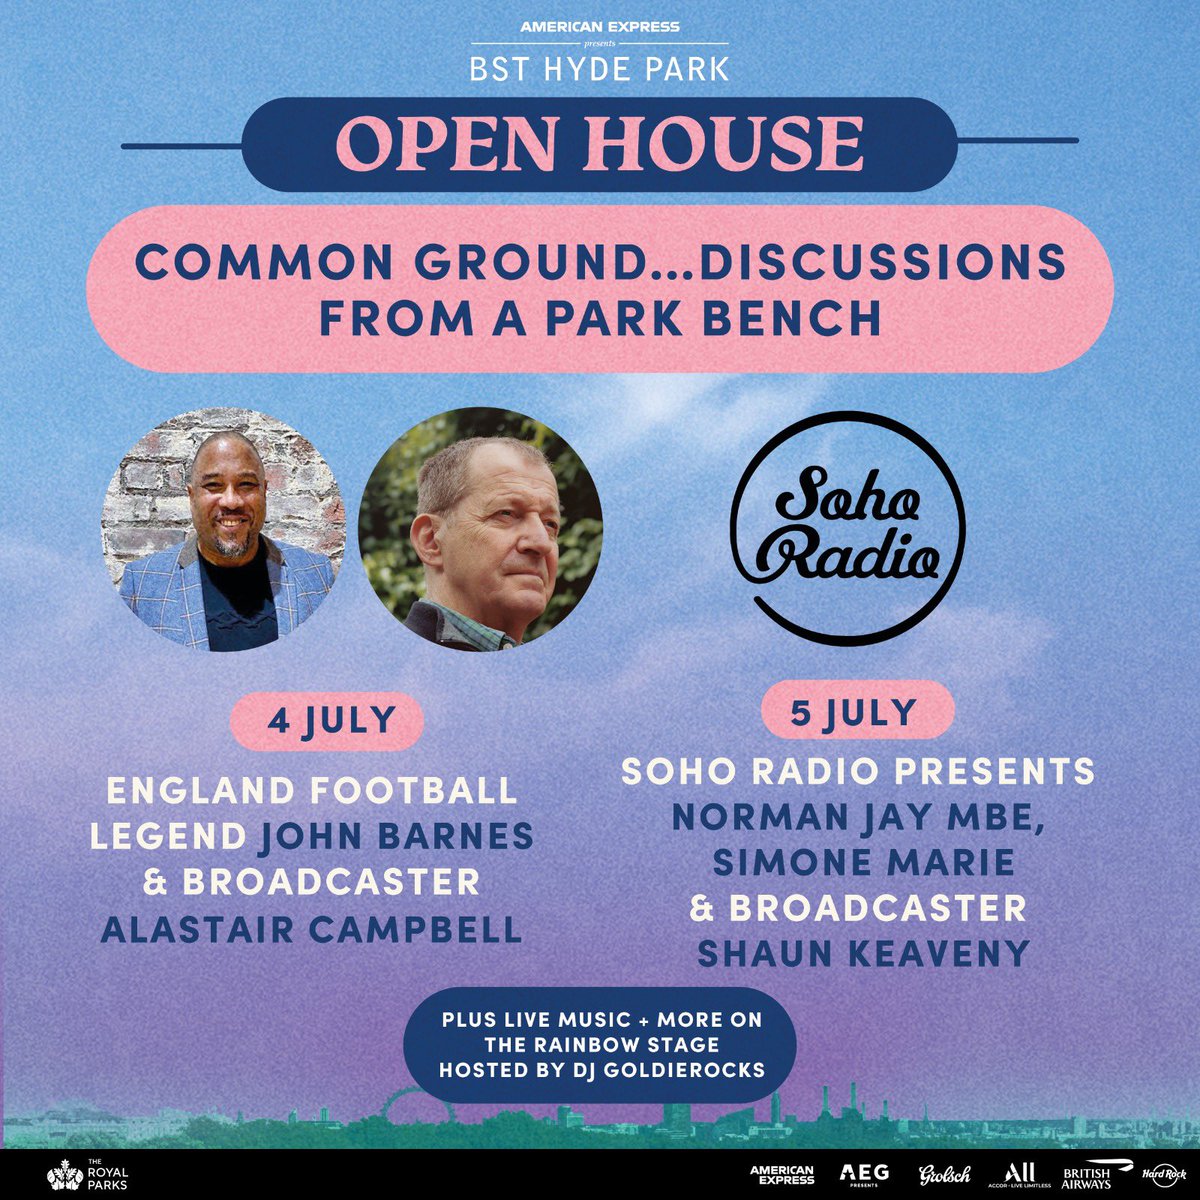 Join me 6pm on Tues 4th July for COMMON GROUND... DISCUSSIONS FROM A PARK BENCH live in Hyde Park. I’ll be discussing all things football, politics, racism and capitalism with broadcaster Alastair Campbell. For more information head to: bst-hydepark.com/open-house